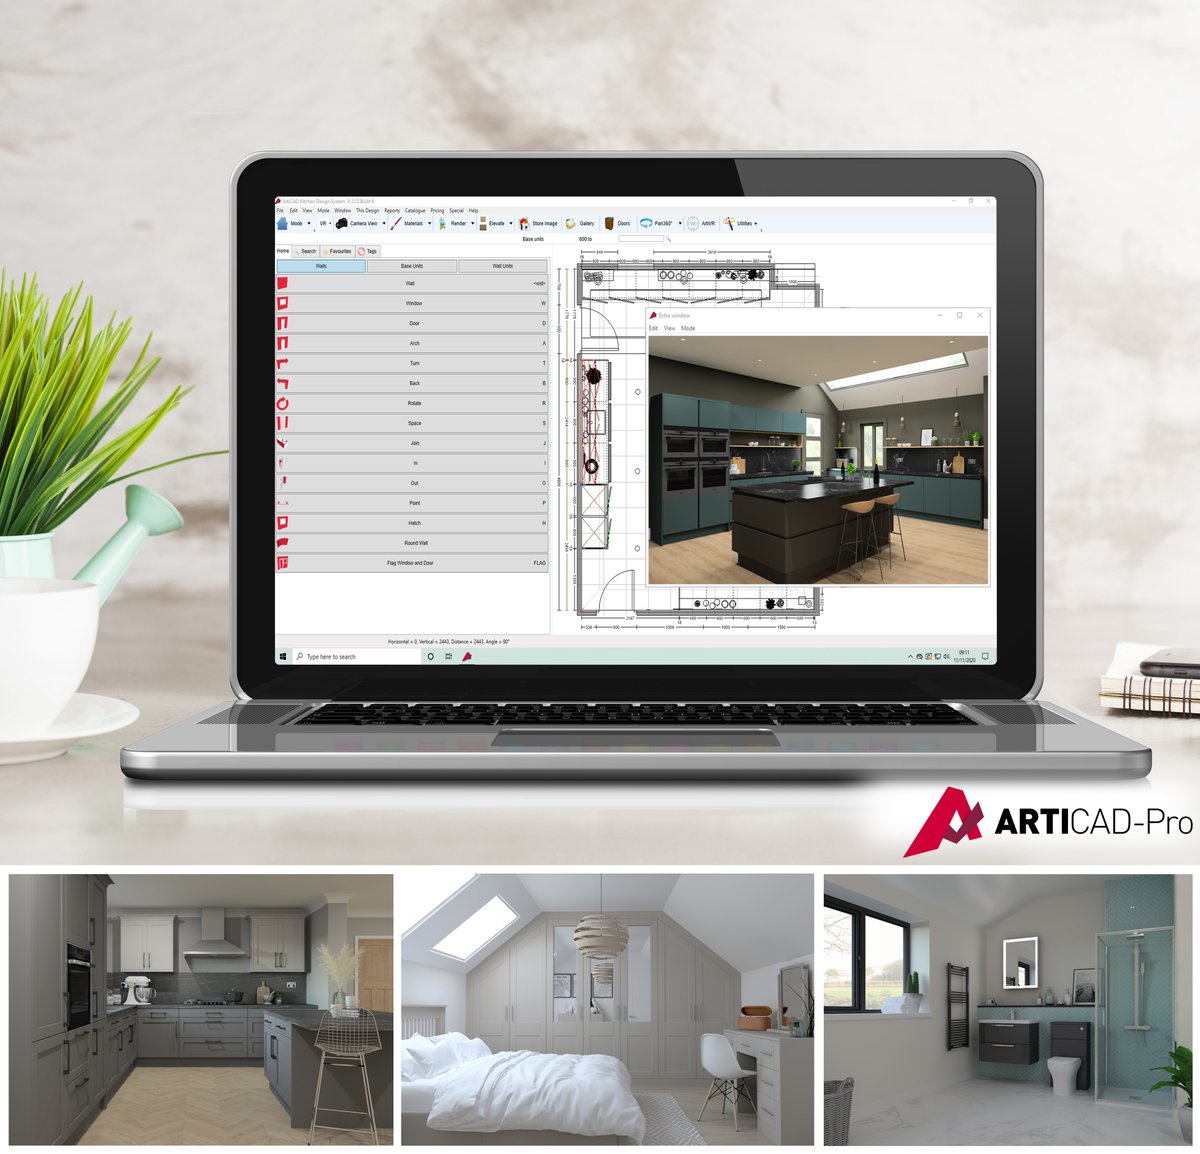 Impress more customers & secure more sales with our leading kitchen, bedroom & bathroom design software, ArtiCAD-Pro! Extremely fast & easy to learn, ArtiCAD-Pro is currently used by thousands of designers as a key part of their design & sales process. ⬇ bit.ly/38dq3gQ